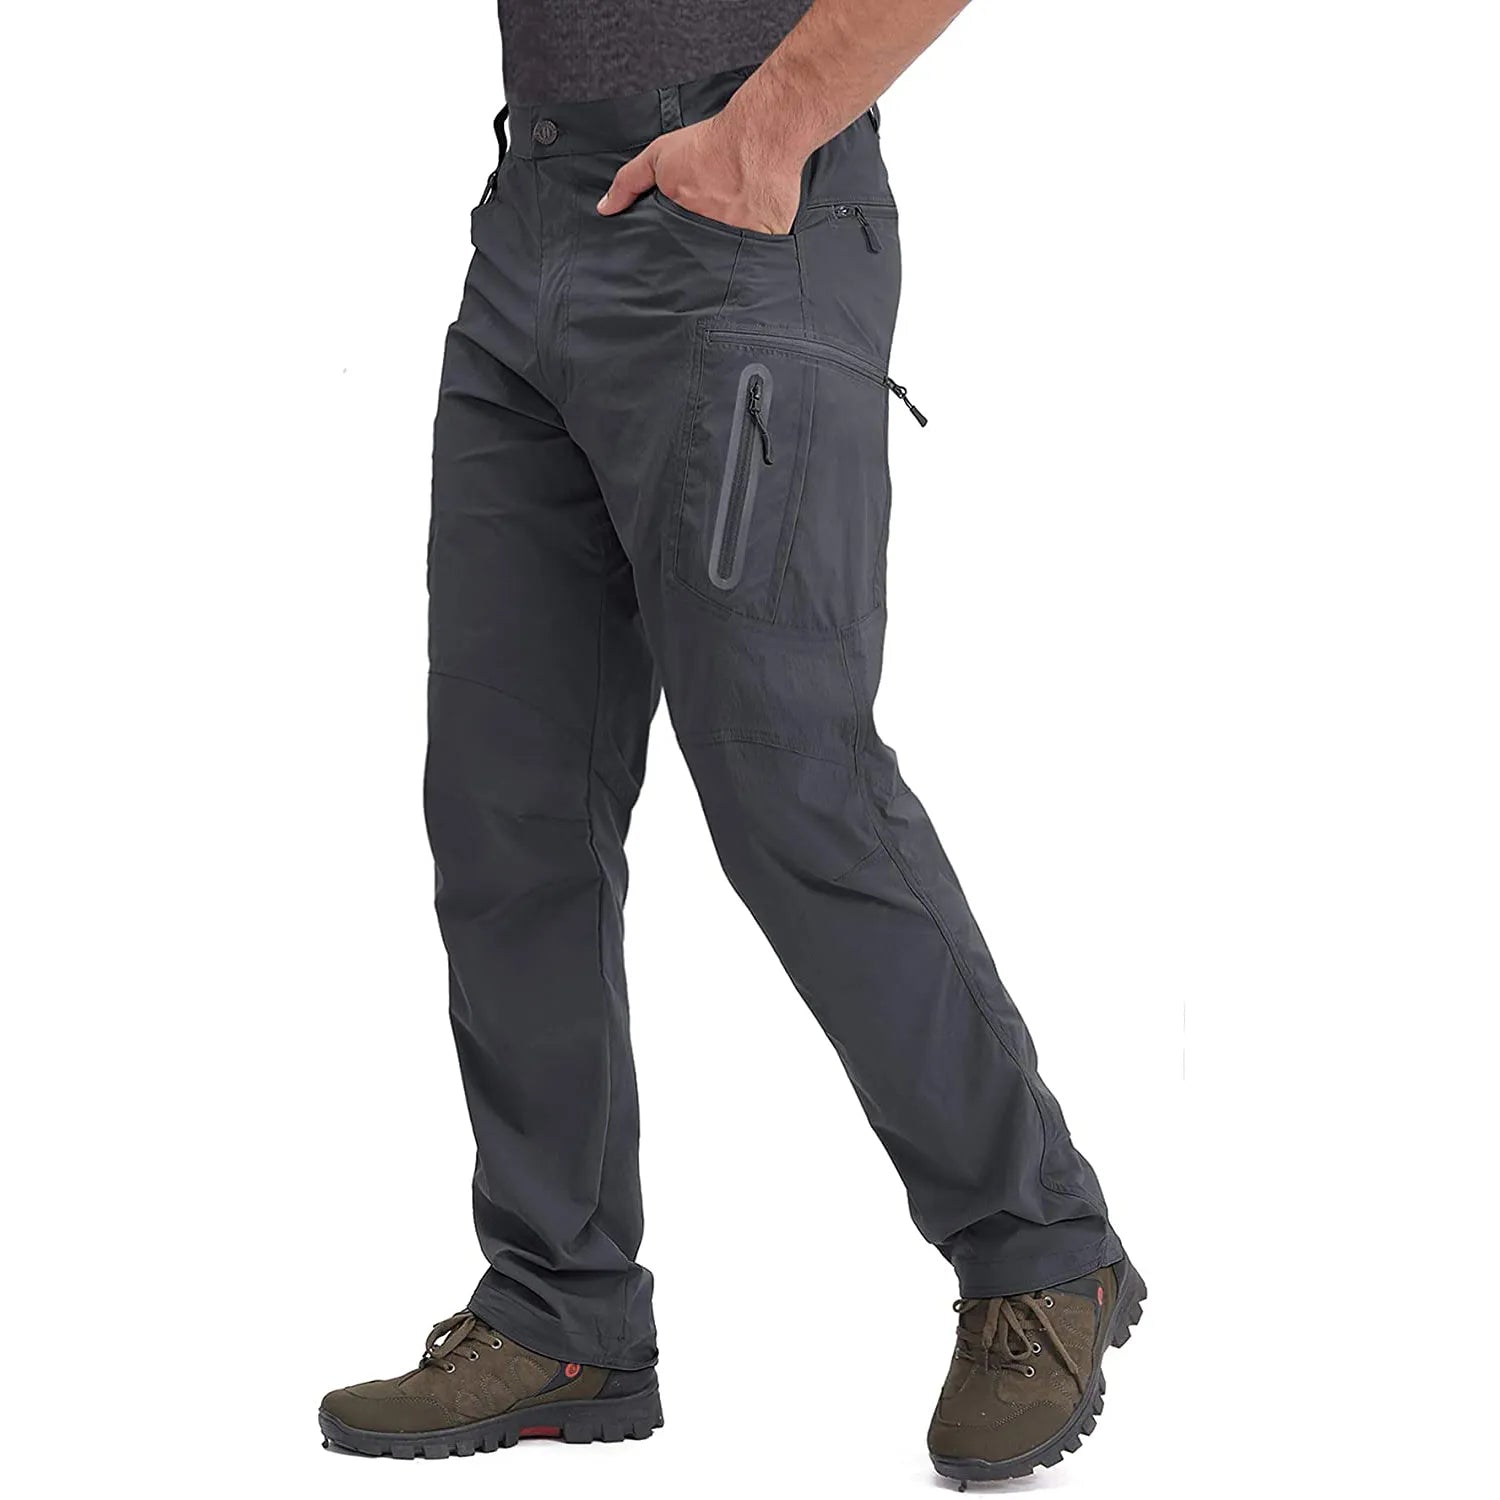 Amazon's Top-selling Men's Hiking Pants Are 43% Off